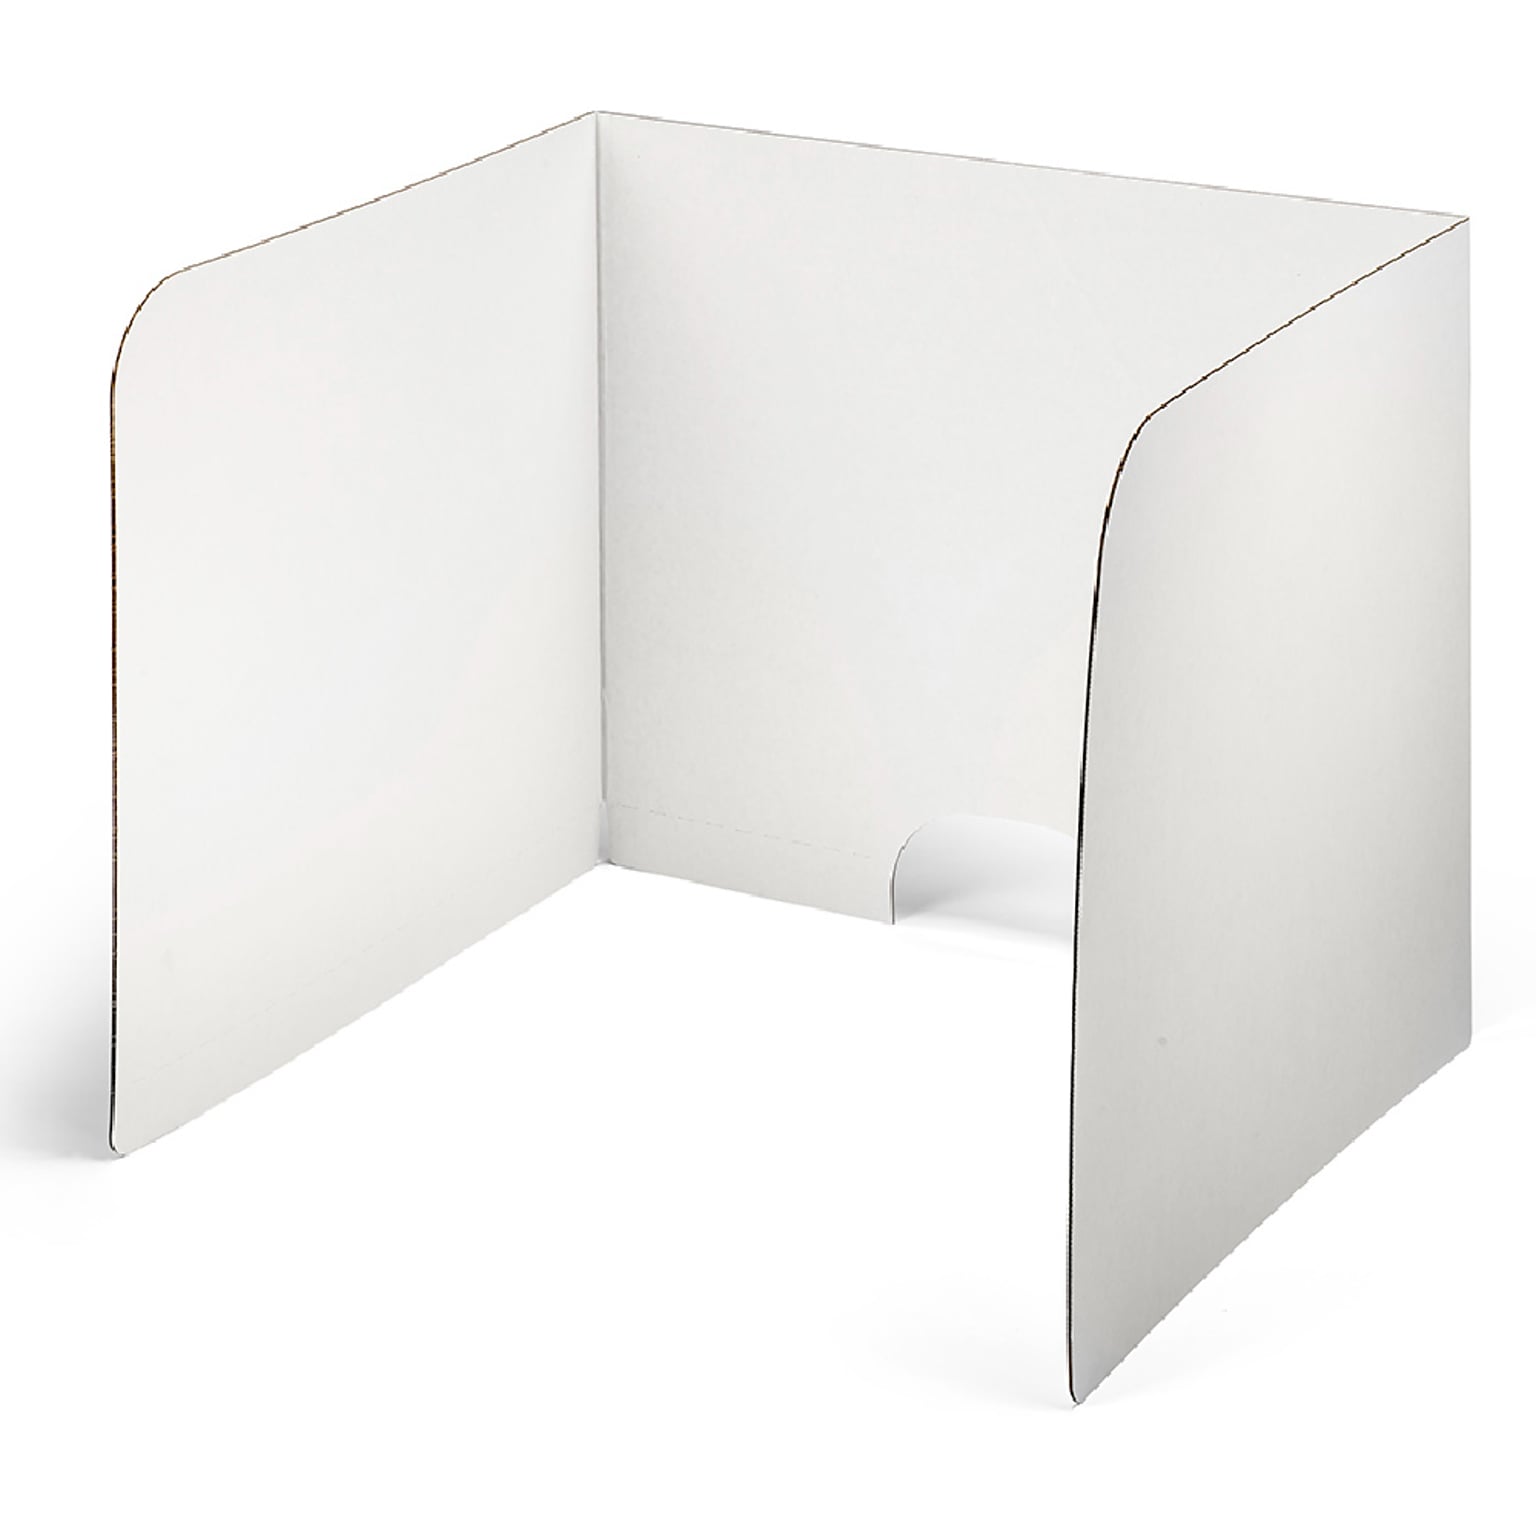 Classroom Products Foldable Cardboard Freestanding Privacy Shield, 24H x 28W, White, 10/Box (VB2410 WH)